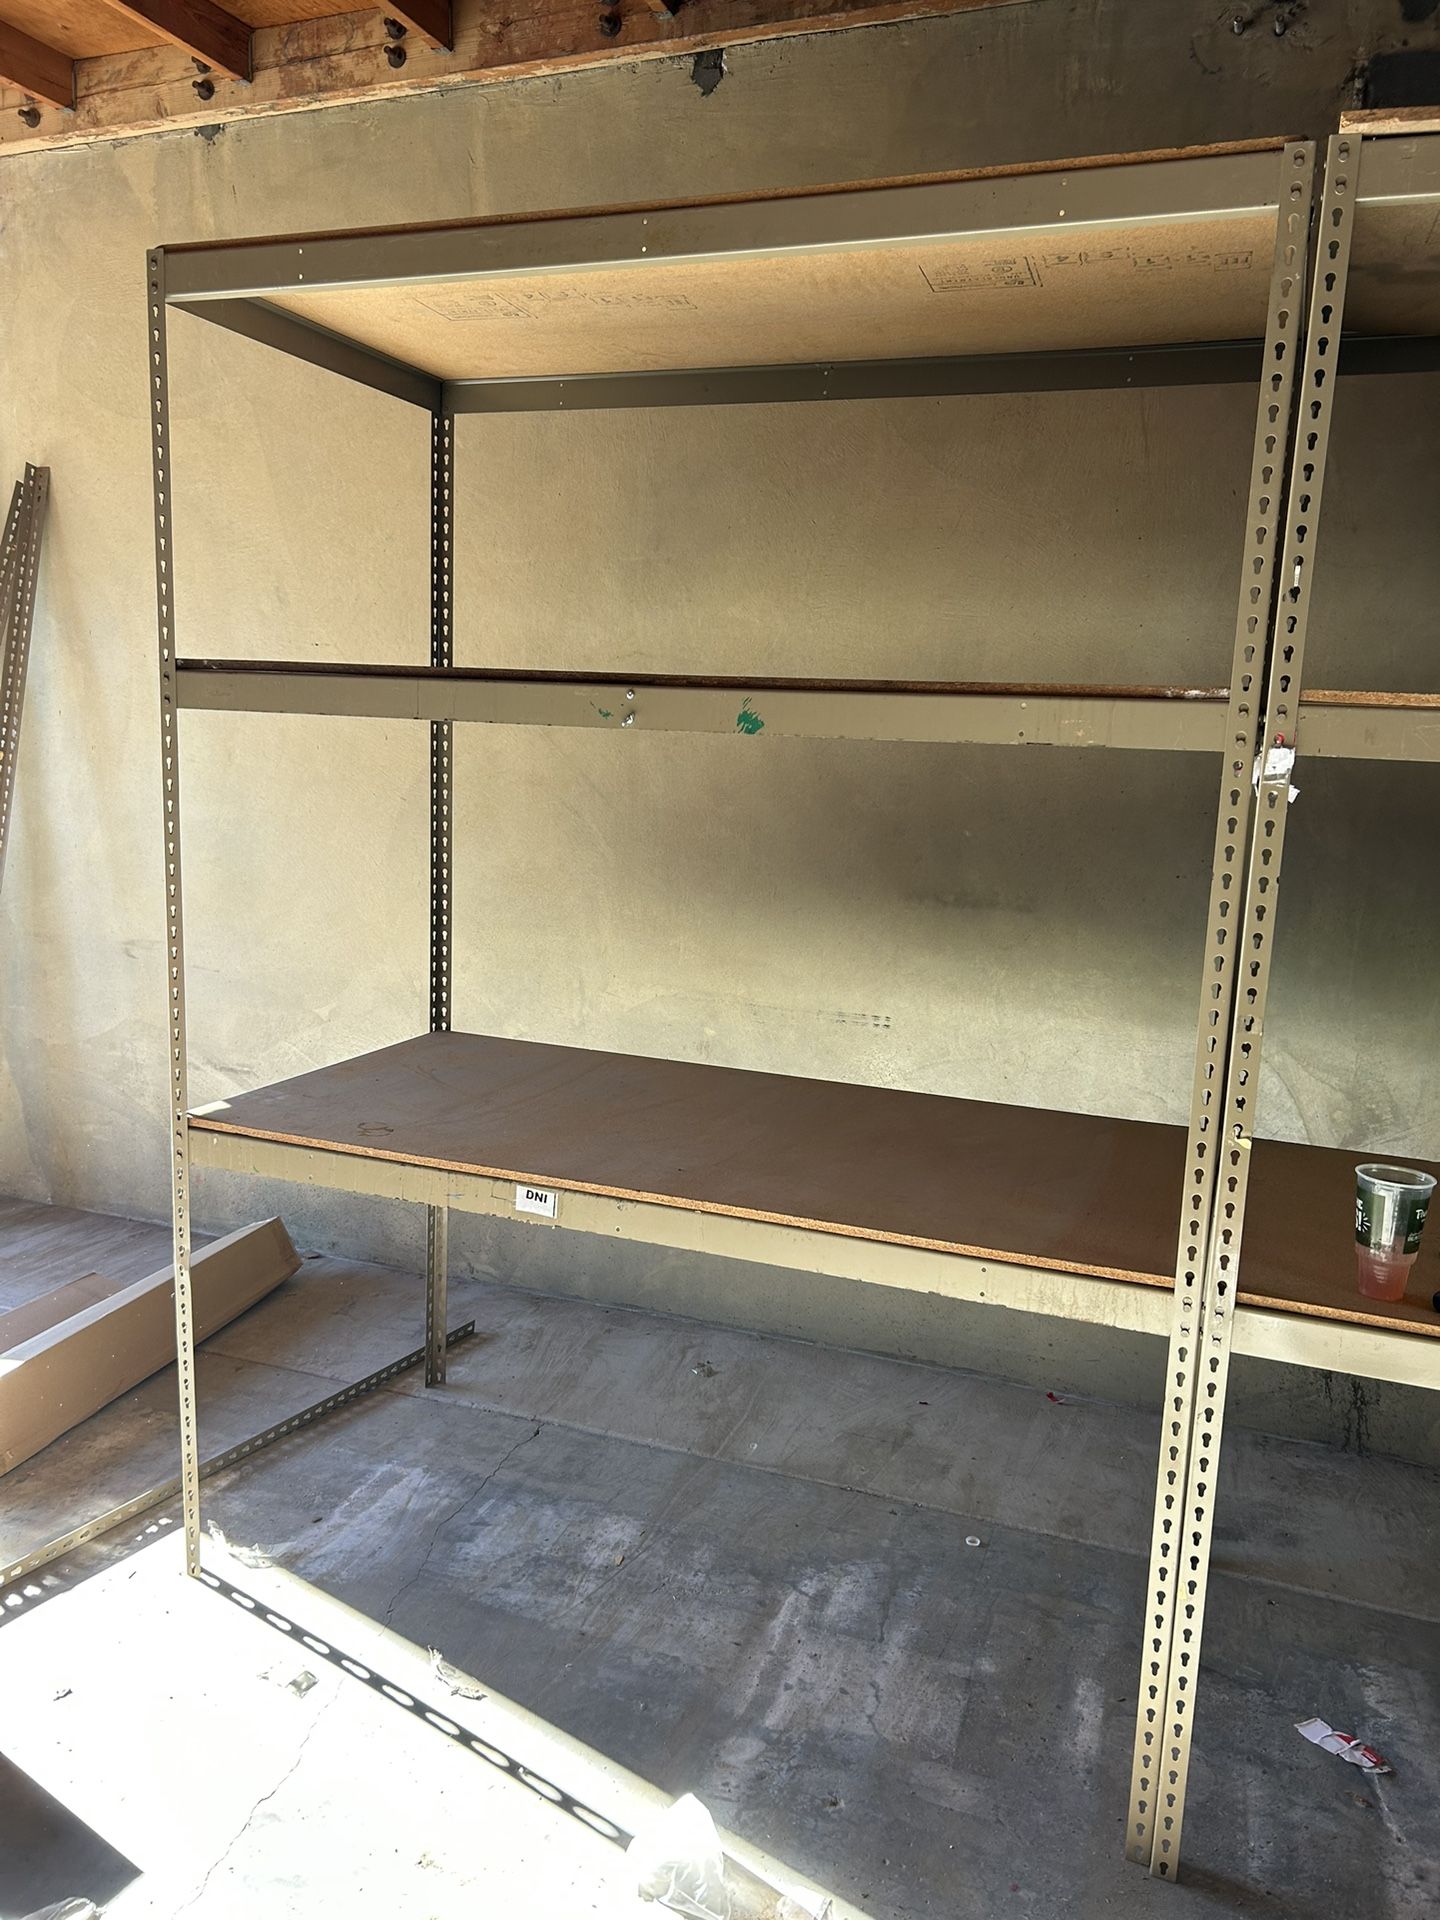 Steel Industrial Metal Or Garage Shelving 96 Inch Tall X 24 Inch Deep 96 Inch Wide As Shown Must Sell 125.00 